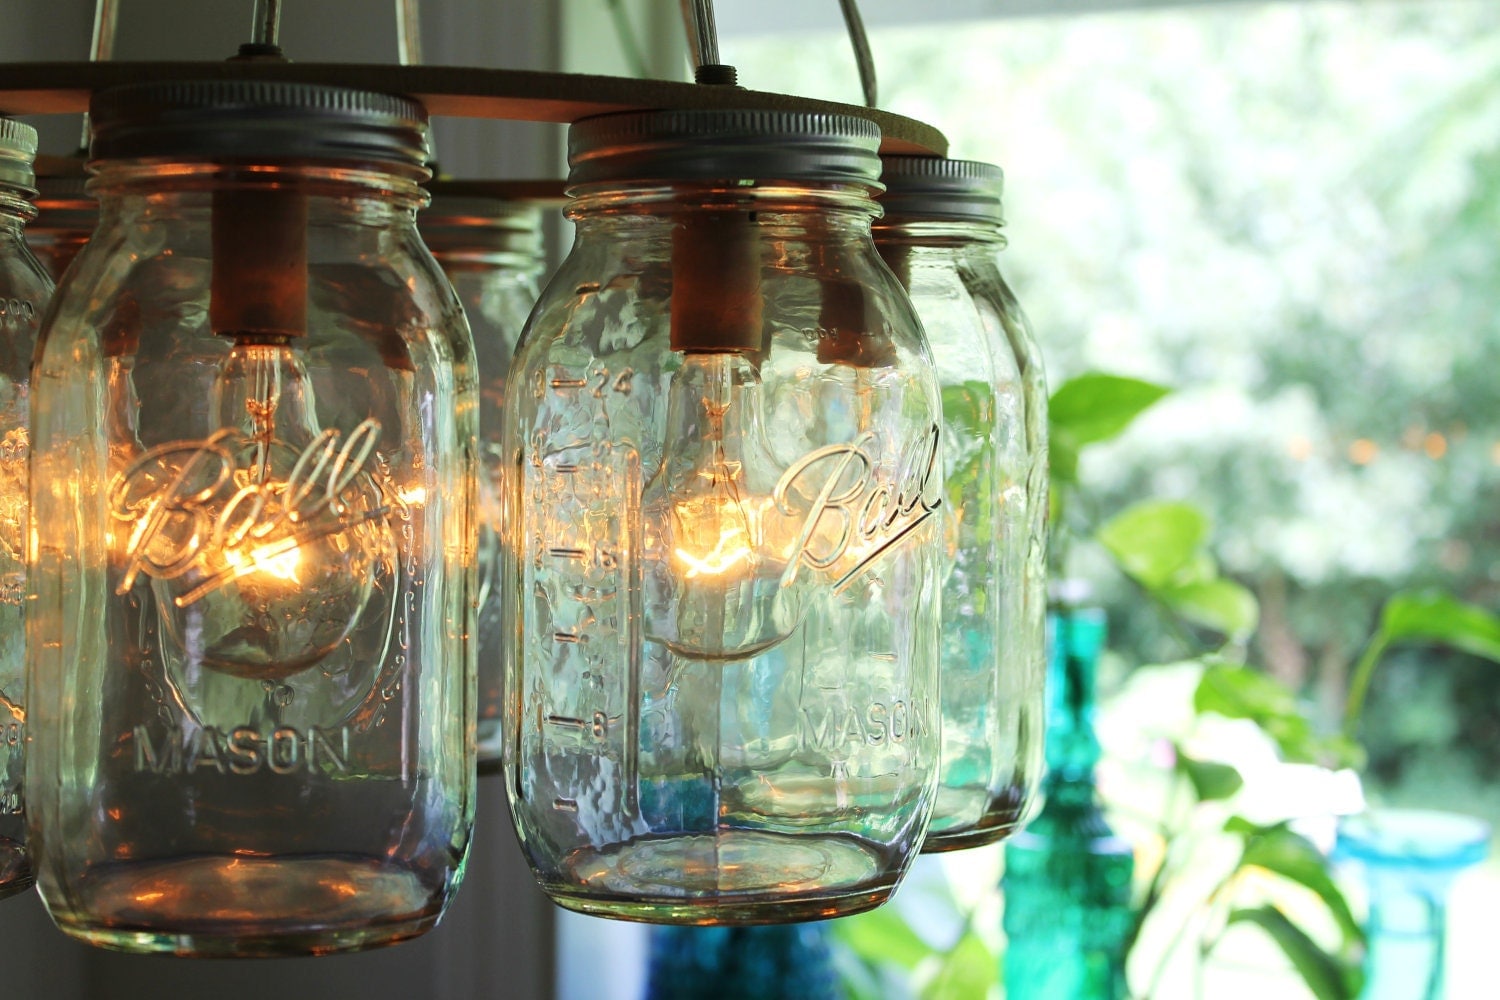 Beautifully rustic Mason Jar chandelier - featured on Momcaster.